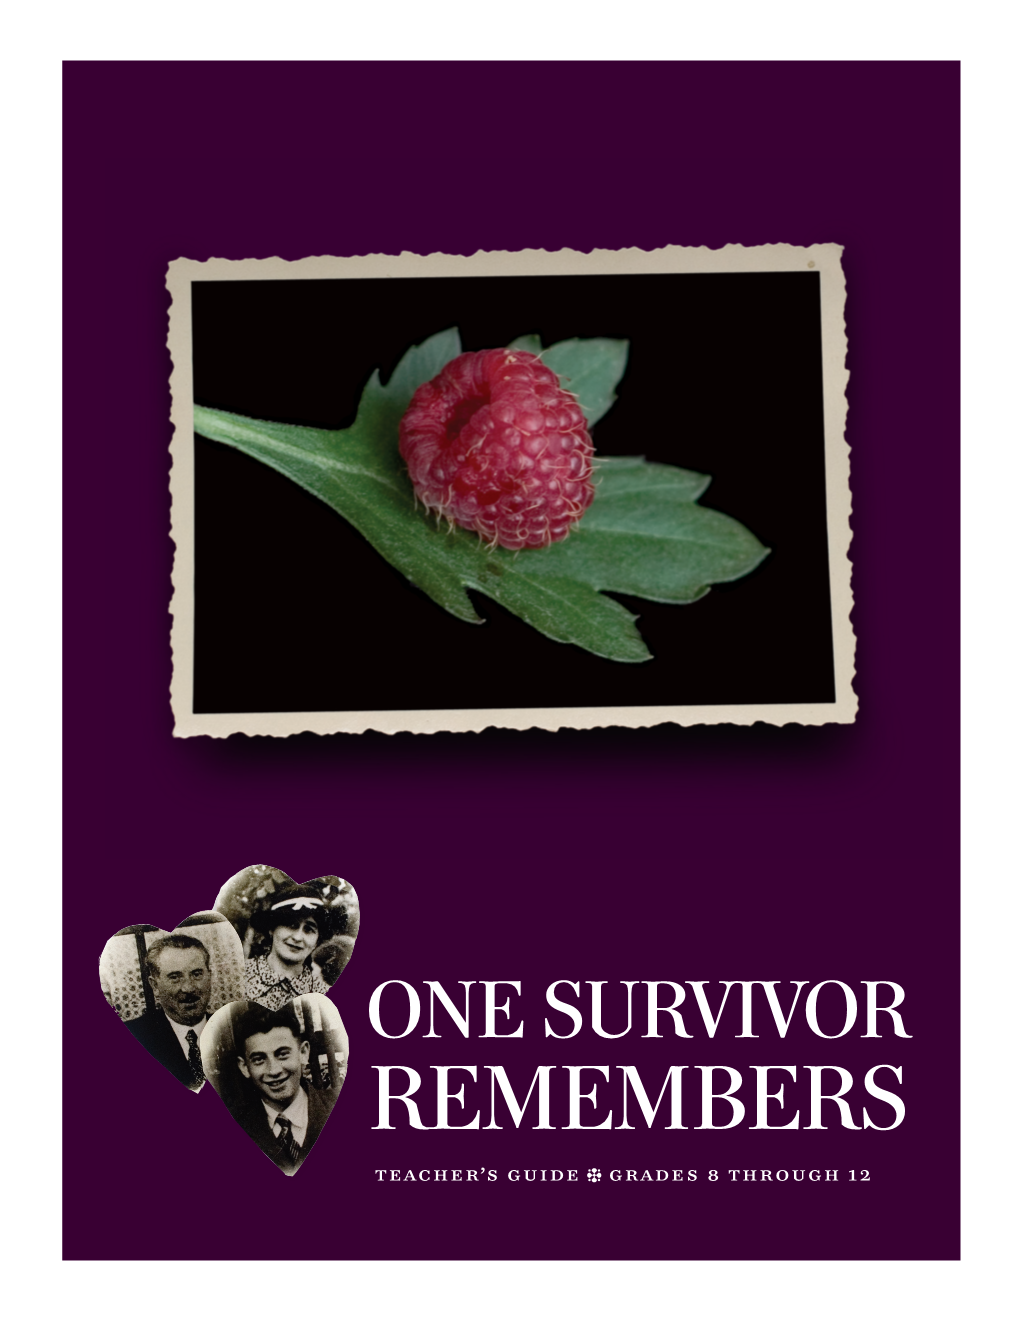 One Survivor Remembers Teacher’S Guide 0 Grades 8 Through 12 Contents a Summary of Gerda’S Story 3 How to Use This Kit 4 a Note About the Primary Documents 5